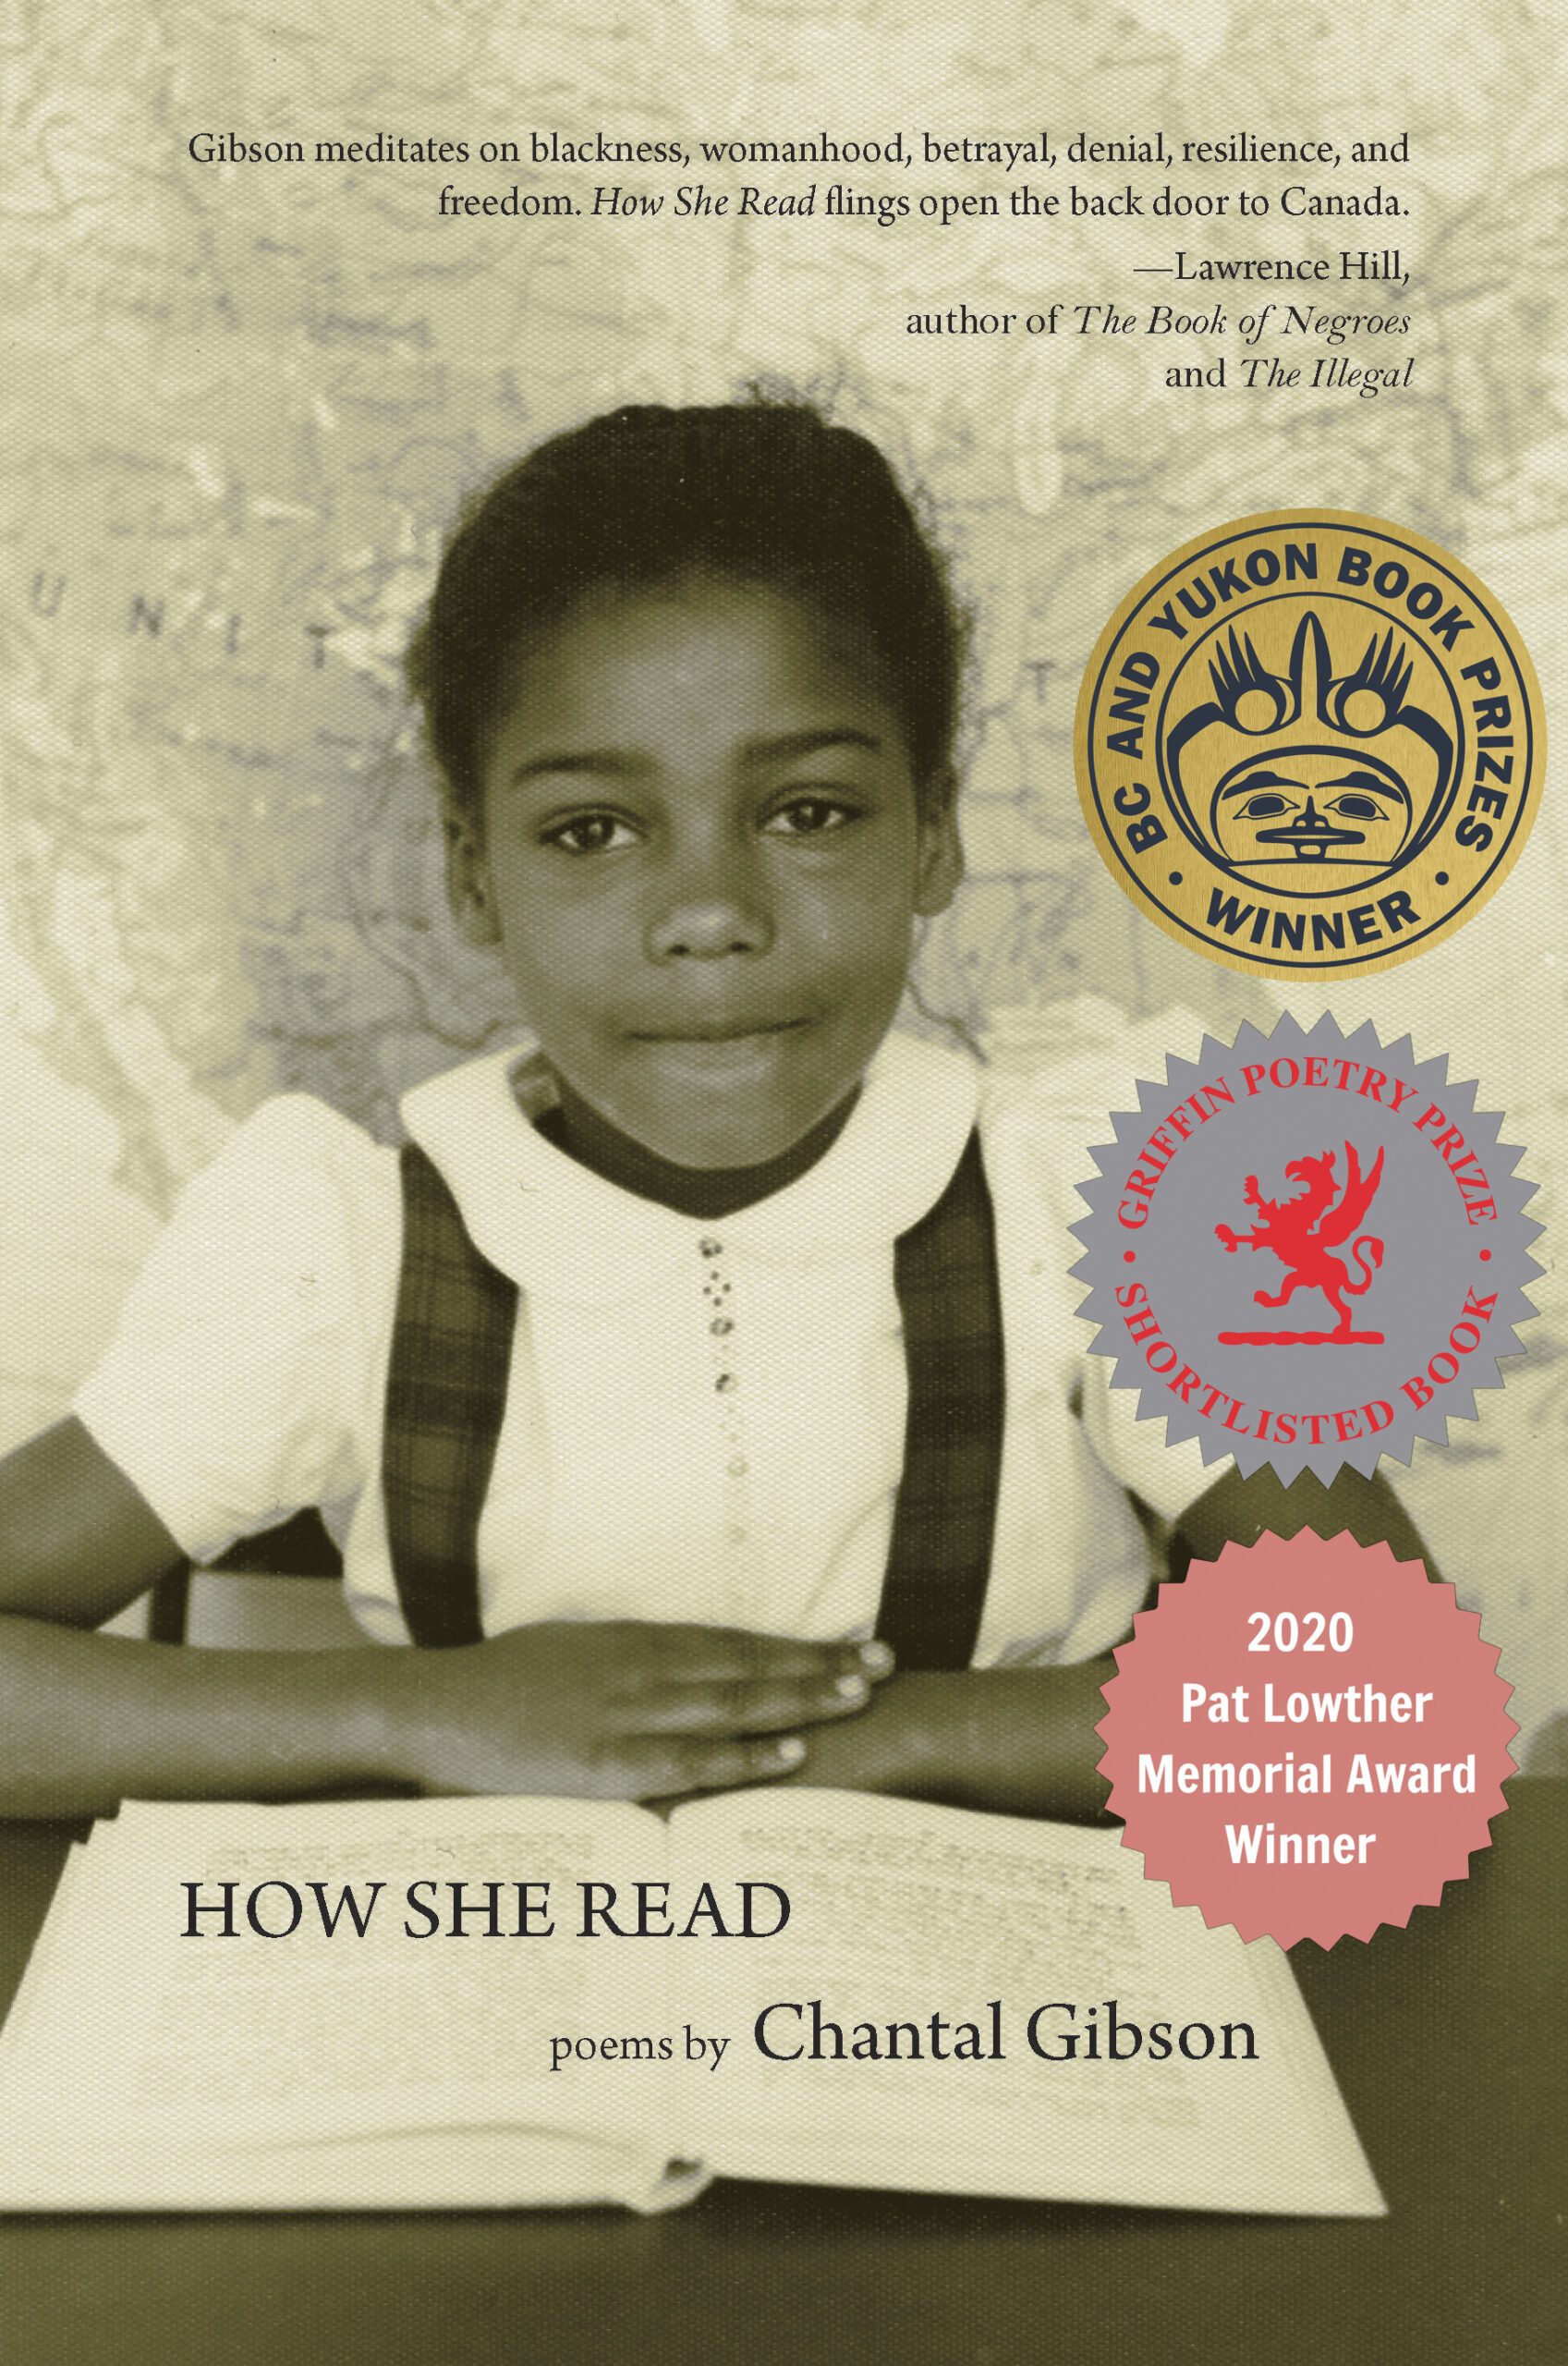 The cover of How She Read